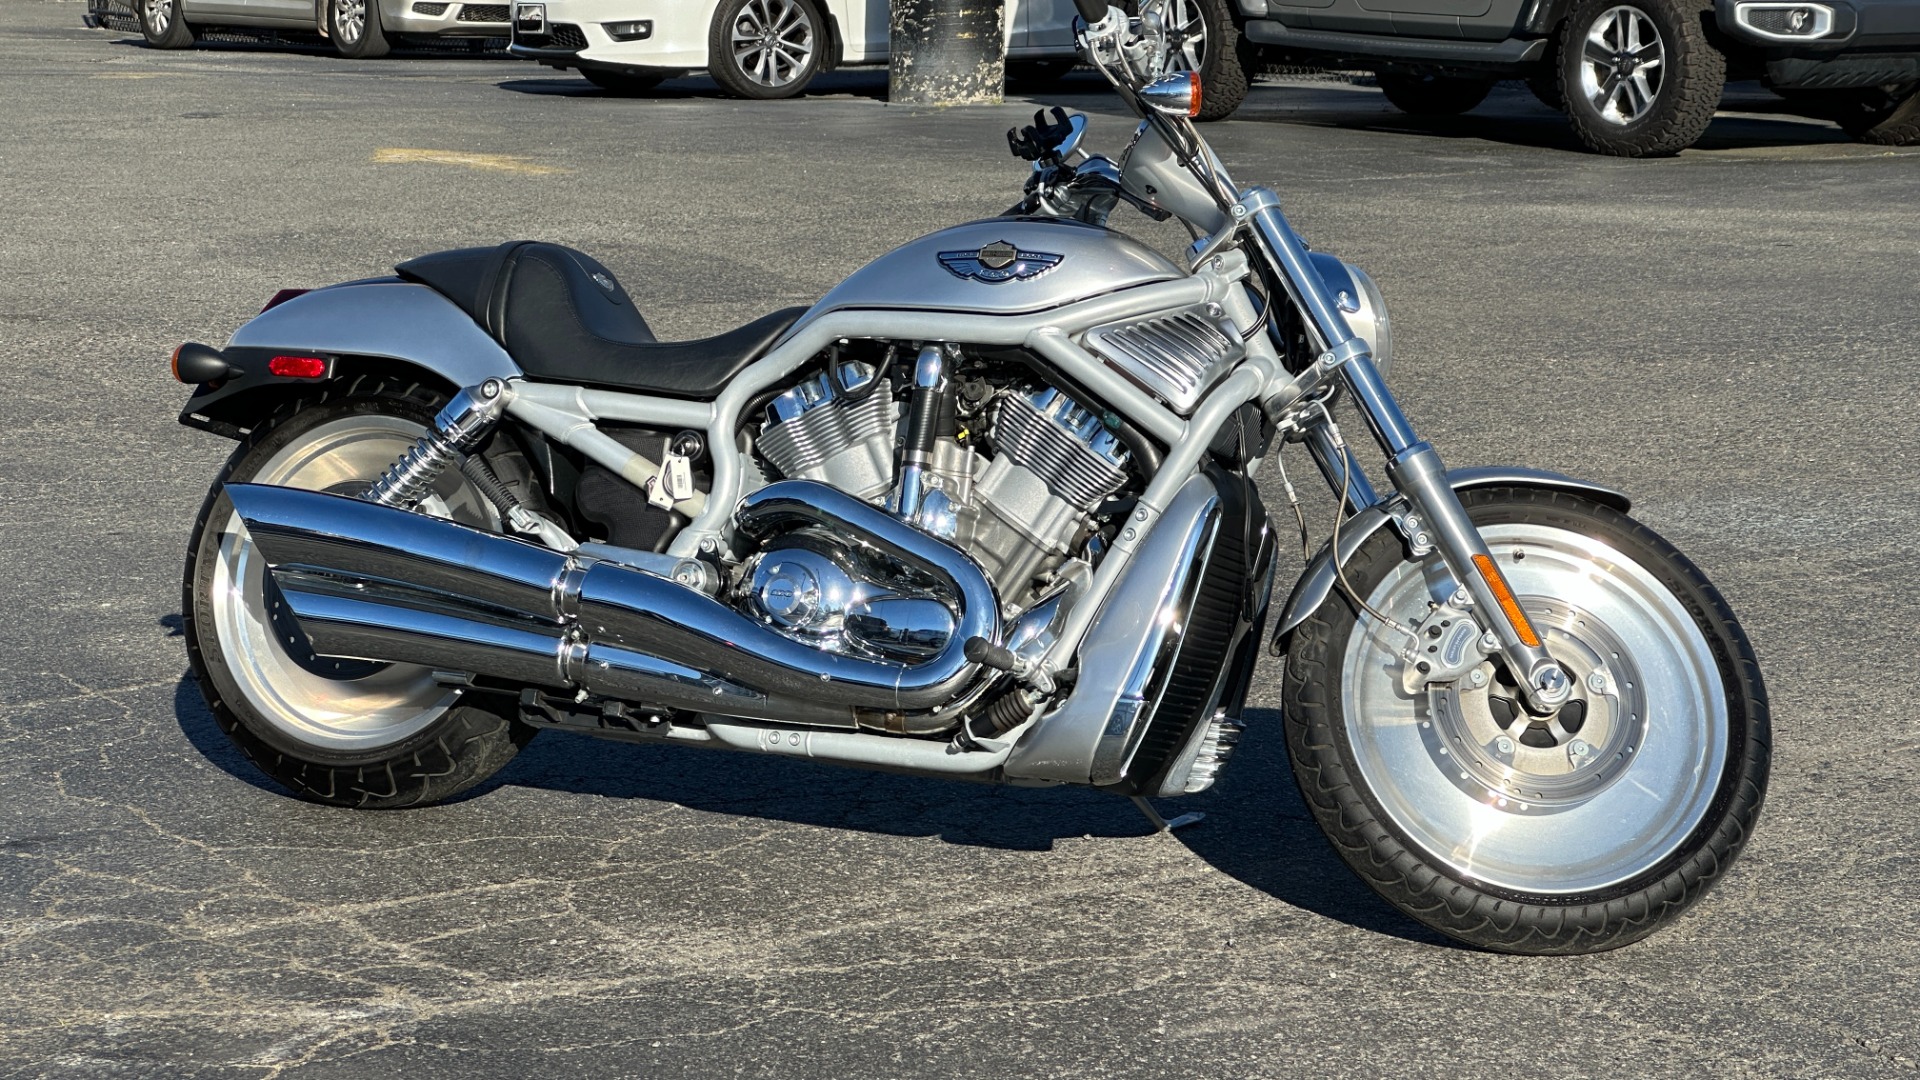 Used 2003 Harley Davidson V Rod ANNIVERSARY EDITION / 1130CC ENGINE / BREMBO BRAKES / VORTEX AIR SCOOPS for sale Sold at Formula Imports in Charlotte NC 28227 62